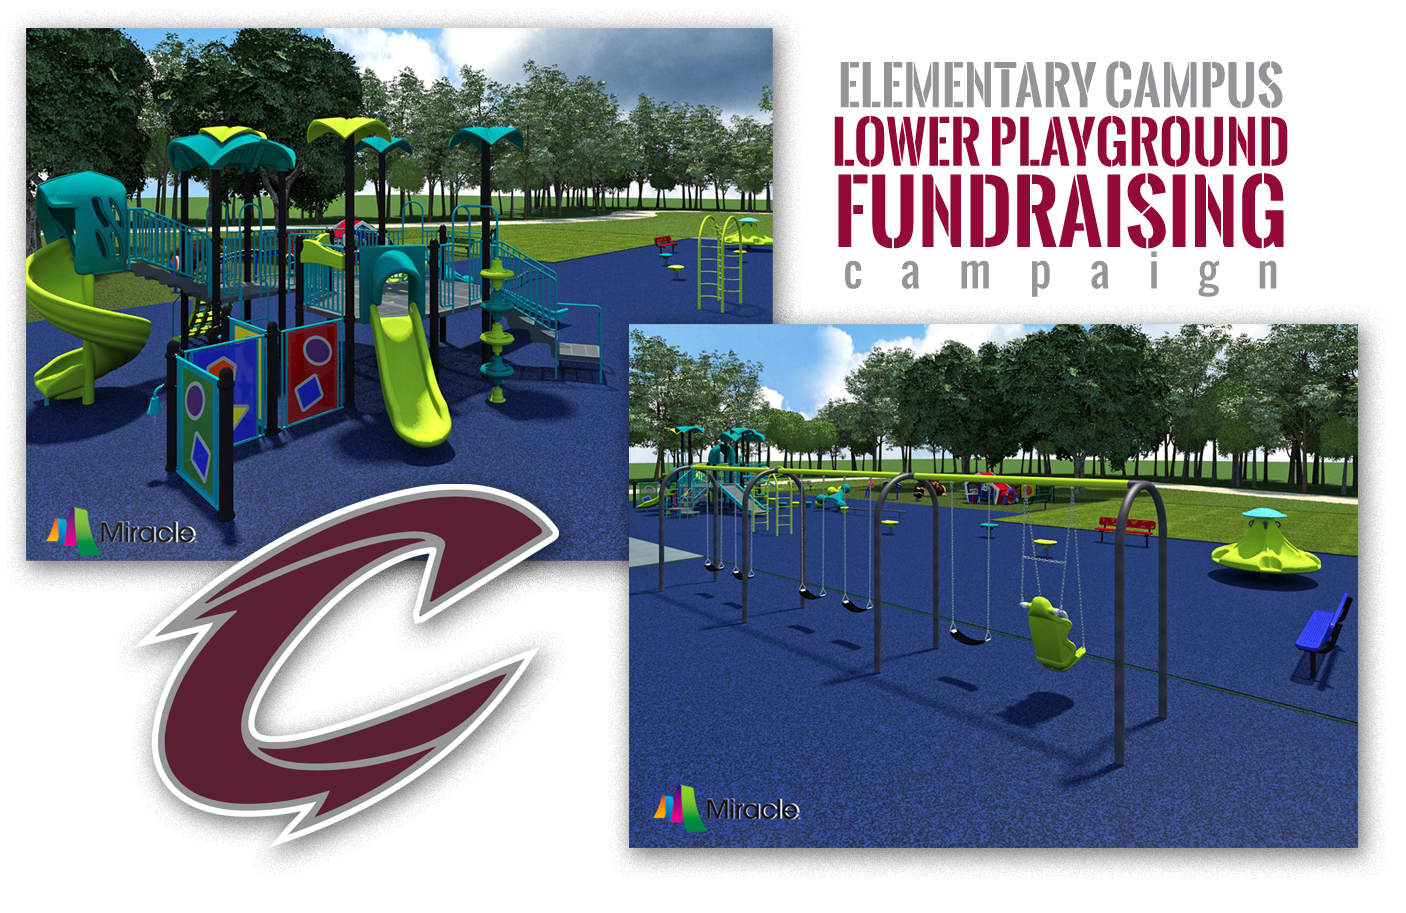 Clarke Elementary Calling On Community for Playground Fundraising Help